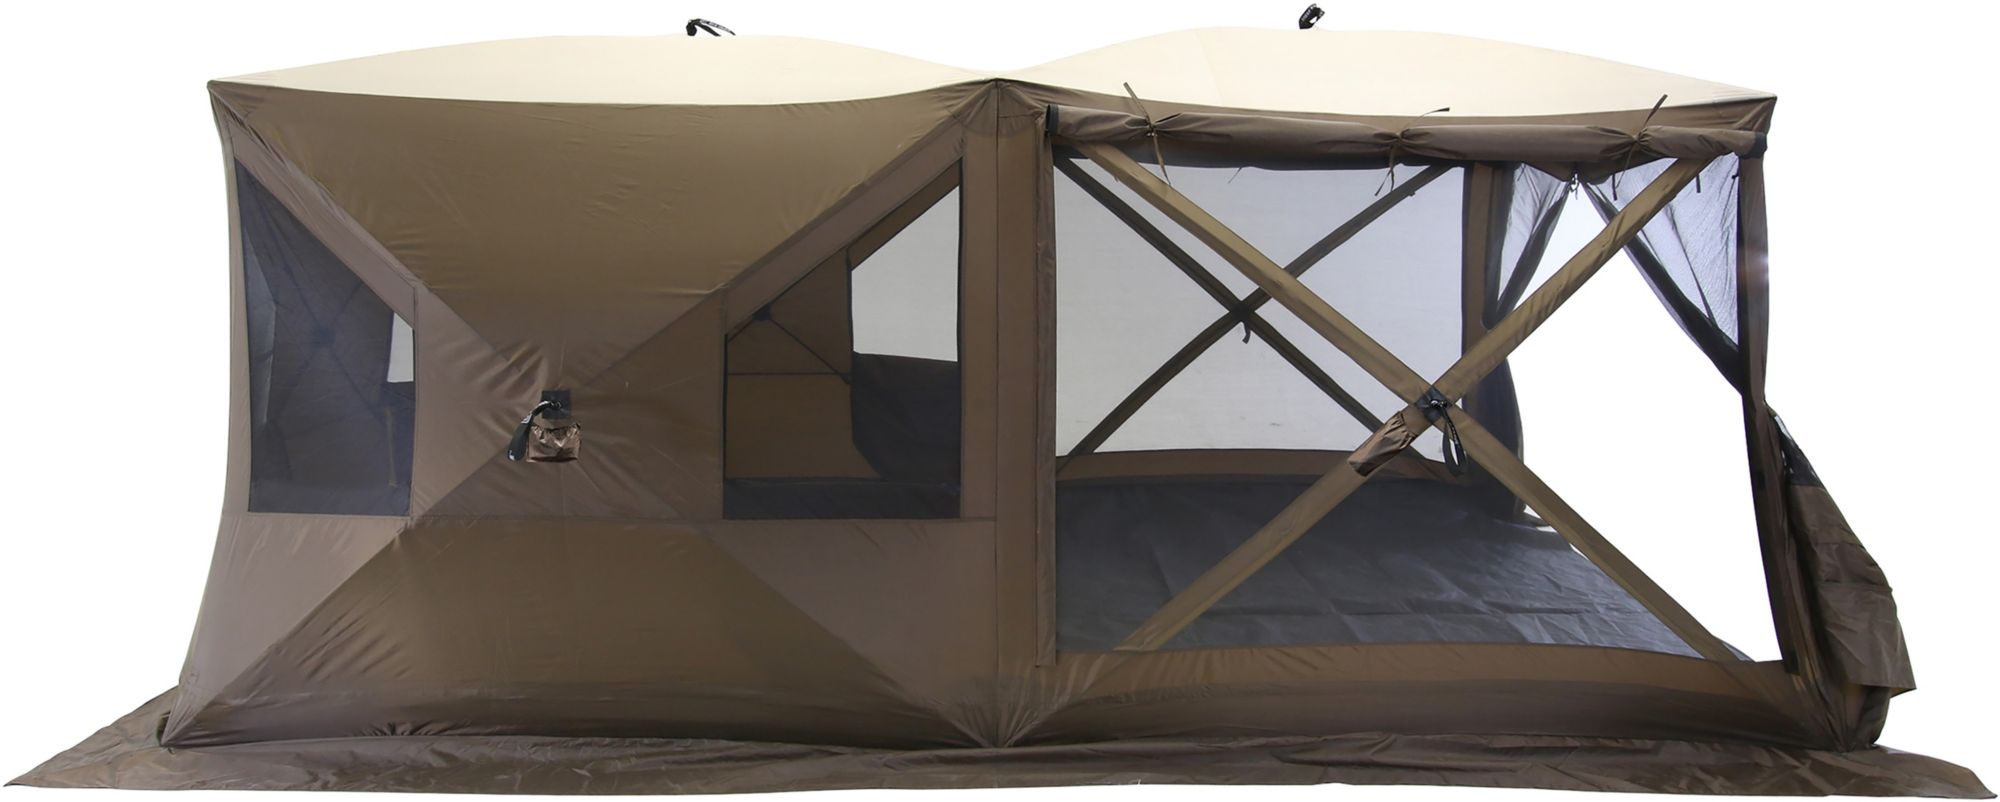 Clam Outdoors X-600Thermal Ice Team Ice Fishing Shelter